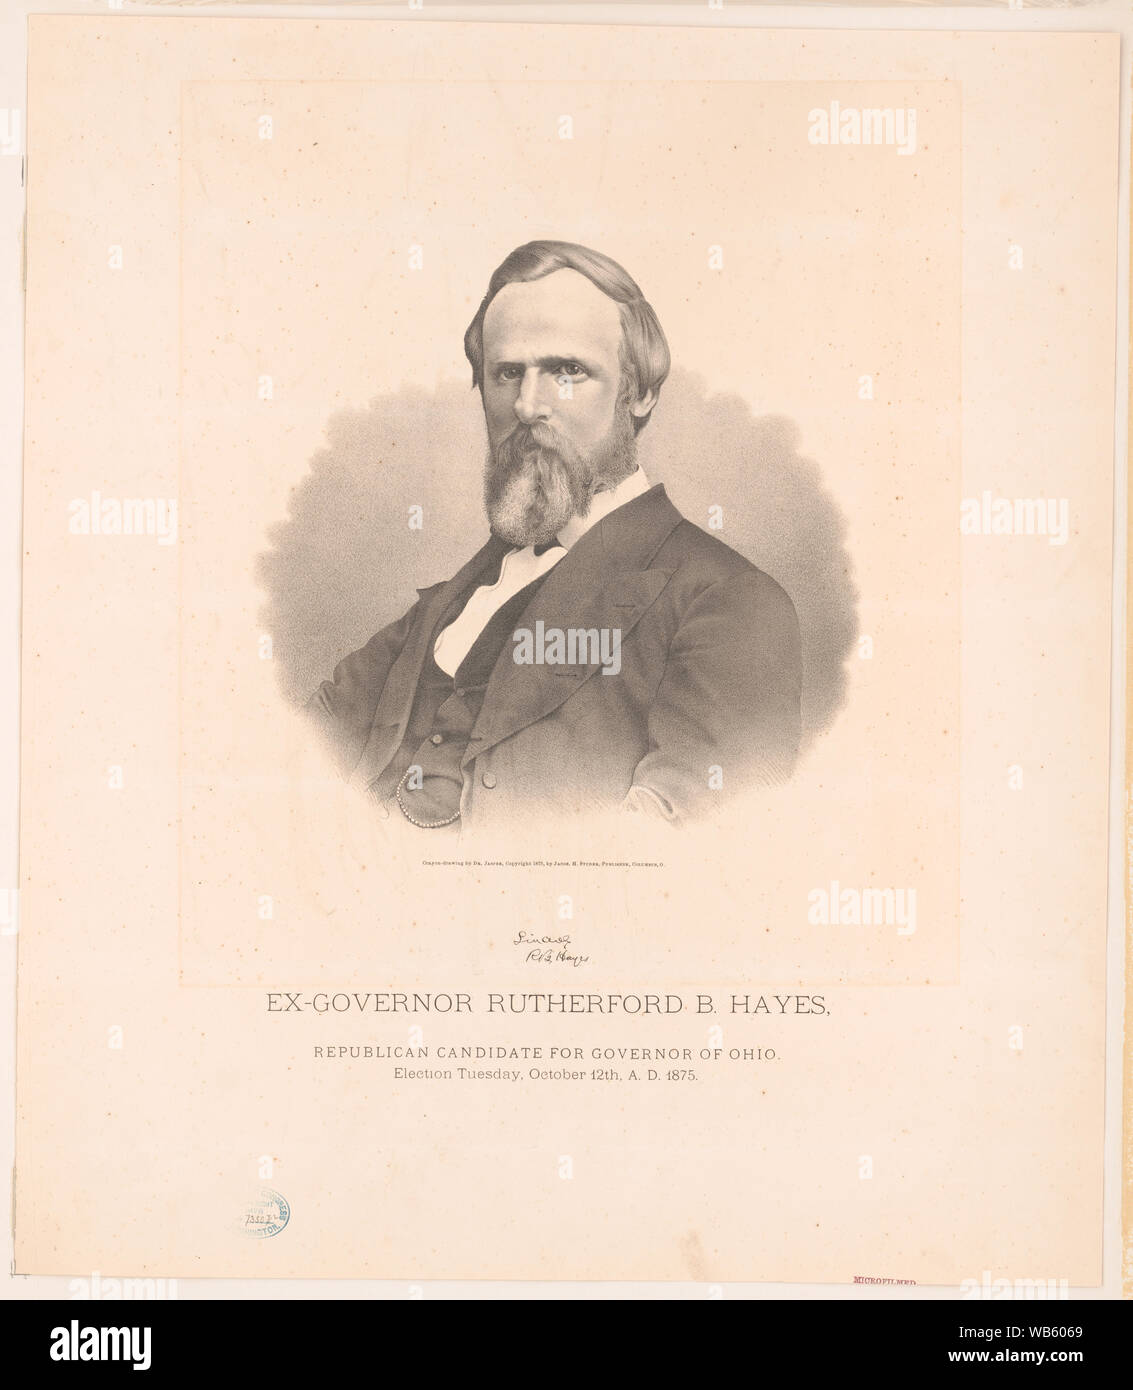 Ex-Governor Rutherford B. Hayes, Republican candidate for Governor of Ohio. Election Tuesday, October 12th, A.D. 1875 / crayon-drawing by Dr. Jasper. Abstract/medium: 1 print : lithograph ; 53.3 x 46.3 cm Stock Photo